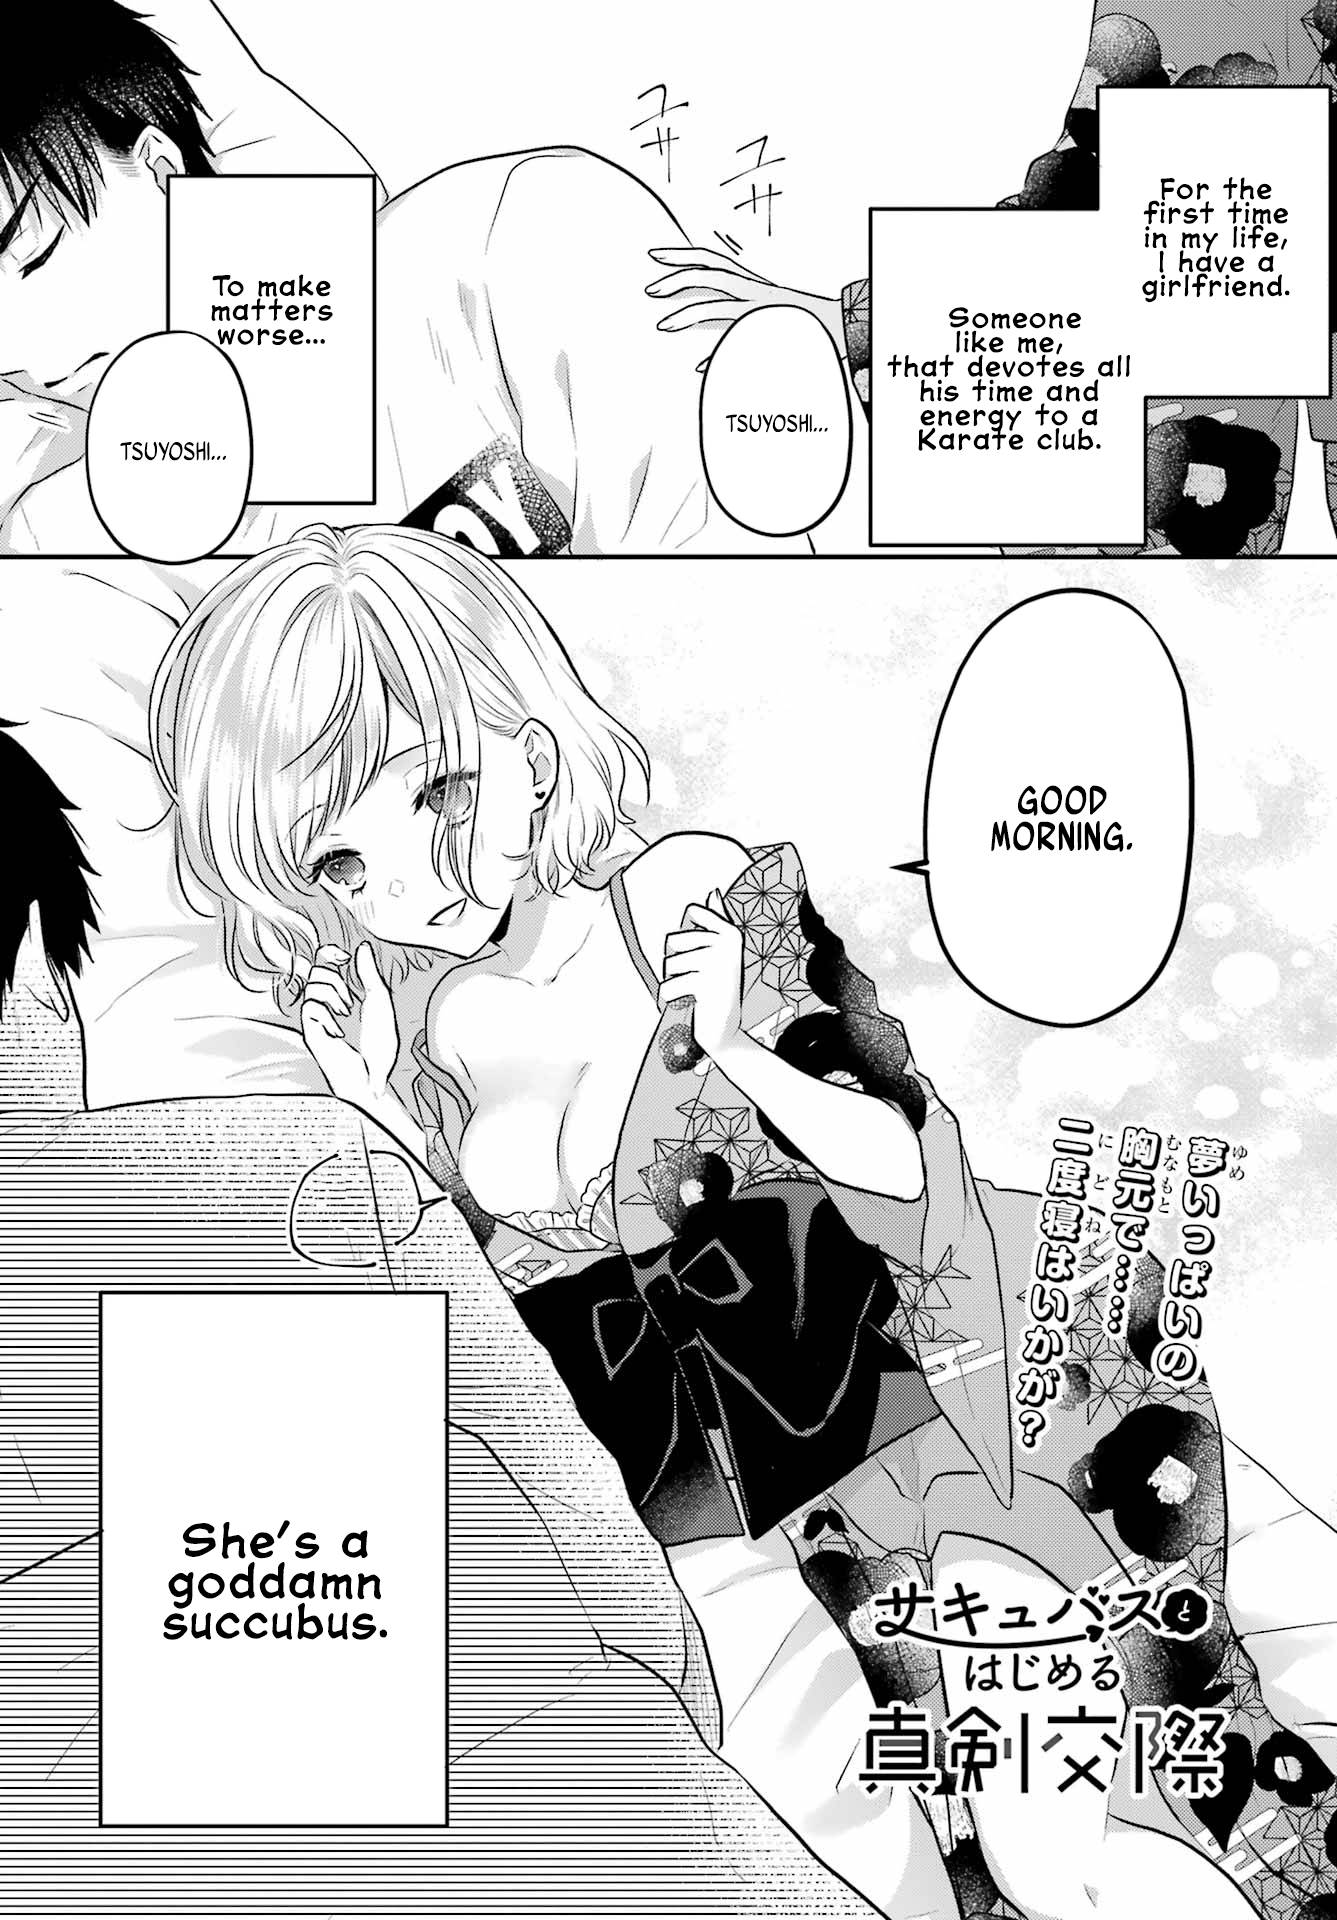 Seriously Dating A Succubus - chapter 2 - #1